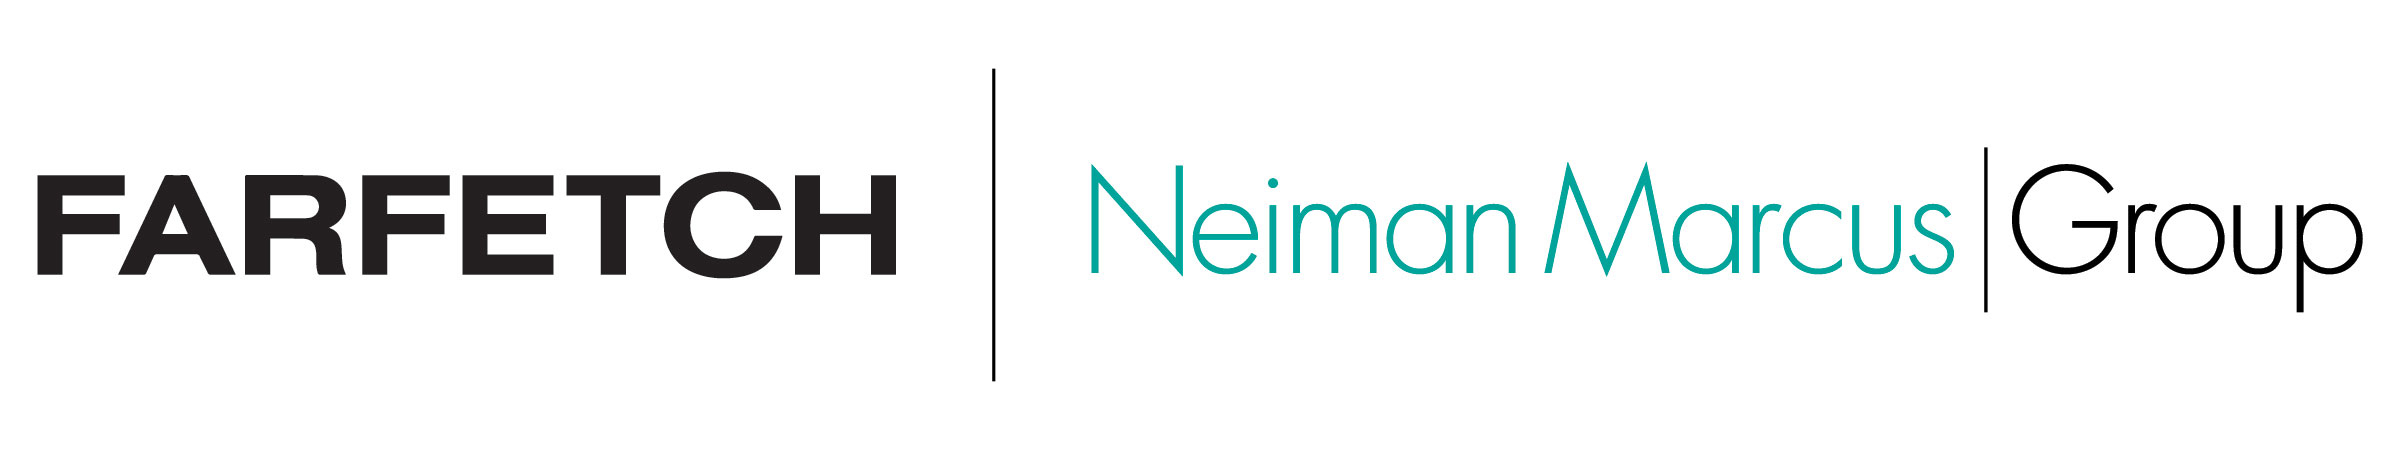 FARFETCH and Neiman Marcus Group Announce Global Strategic